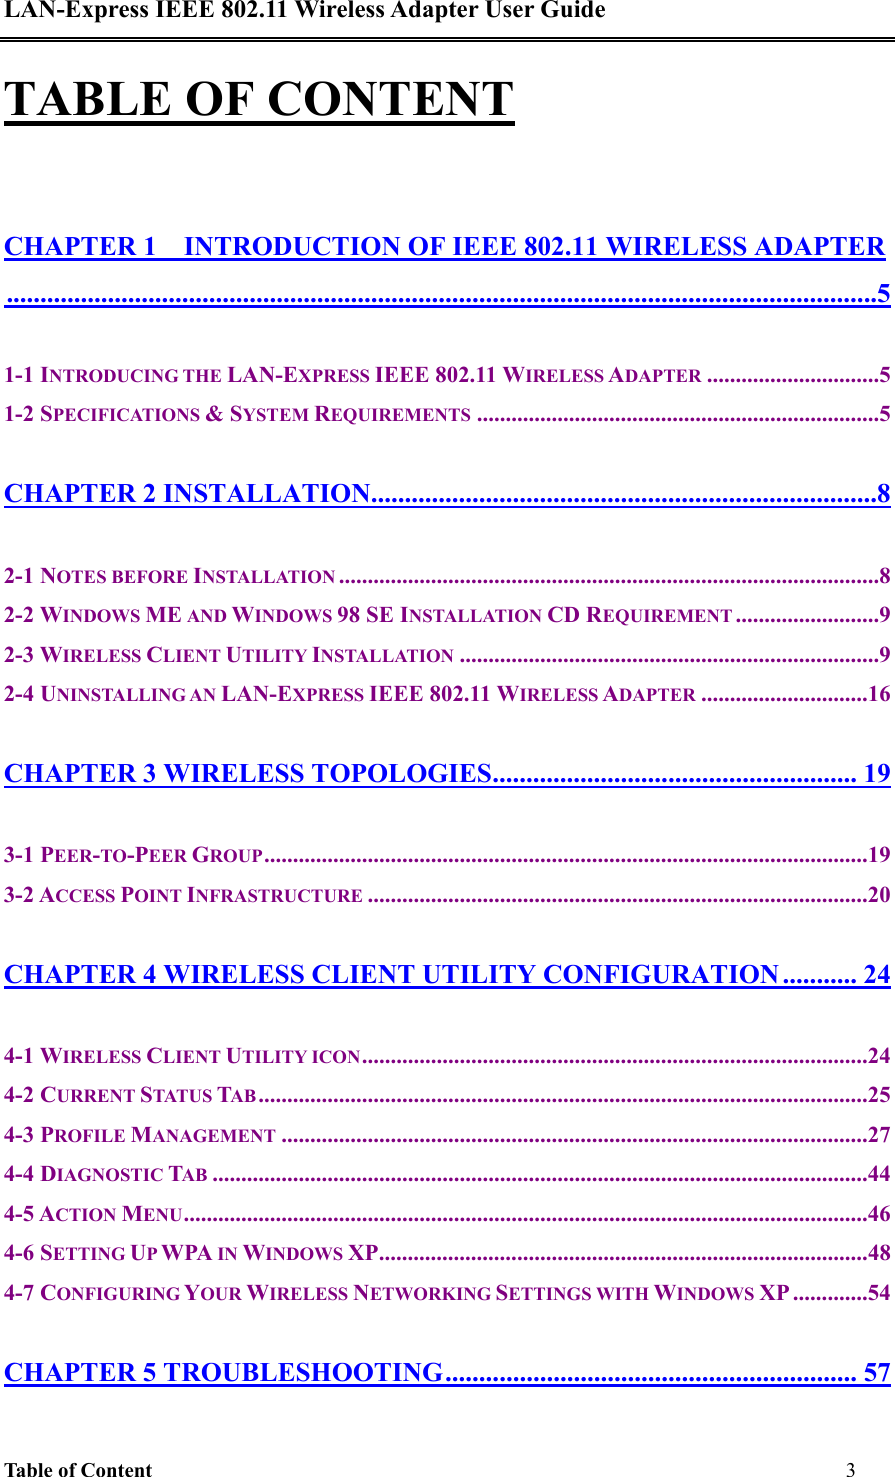 LAN-Express IEEE 802.11 Wireless Adapter User Guide Table of Content         3   TABLE OF CONTENT CHAPTER 1    INTRODUCTION OF IEEE 802.11 WIRELESS ADAPTER.................................................................................................................................5 1-1 INTRODUCING THE LAN-EXPRESS IEEE 802.11 WIRELESS ADAPTER ..............................5 1-2 SPECIFICATIONS &amp; SYSTEM REQUIREMENTS ......................................................................5 CHAPTER 2 INSTALLATION...........................................................................8 2-1 NOTES BEFORE INSTALLATION ..............................................................................................8 2-2 WINDOWS ME AND WINDOWS 98 SE INSTALLATION CD REQUIREMENT .........................9 2-3 WIRELESS CLIENT UTILITY INSTALLATION .........................................................................9 2-4 UNINSTALLING AN LAN-EXPRESS IEEE 802.11 WIRELESS ADAPTER .............................16 CHAPTER 3 WIRELESS TOPOLOGIES...................................................... 19 3-1 PEER-TO-PEER GROUP.........................................................................................................19 3-2 ACCESS POINT INFRASTRUCTURE .......................................................................................20 CHAPTER 4 WIRELESS CLIENT UTILITY CONFIGURATION ........... 24 4-1 WIRELESS CLIENT UTILITY ICON........................................................................................24 4-2 CURRENT STATUS TAB..........................................................................................................25 4-3 PROFILE MANAGEMENT ......................................................................................................27 4-4 DIAGNOSTIC TAB ..................................................................................................................44 4-5 ACTION MENU.......................................................................................................................46 4-6 SETTING UP WPA IN WINDOWS XP.....................................................................................48 4-7 CONFIGURING YOUR WIRELESS NETWORKING SETTINGS WITH WINDOWS XP .............54 CHAPTER 5 TROUBLESHOOTING............................................................. 57 